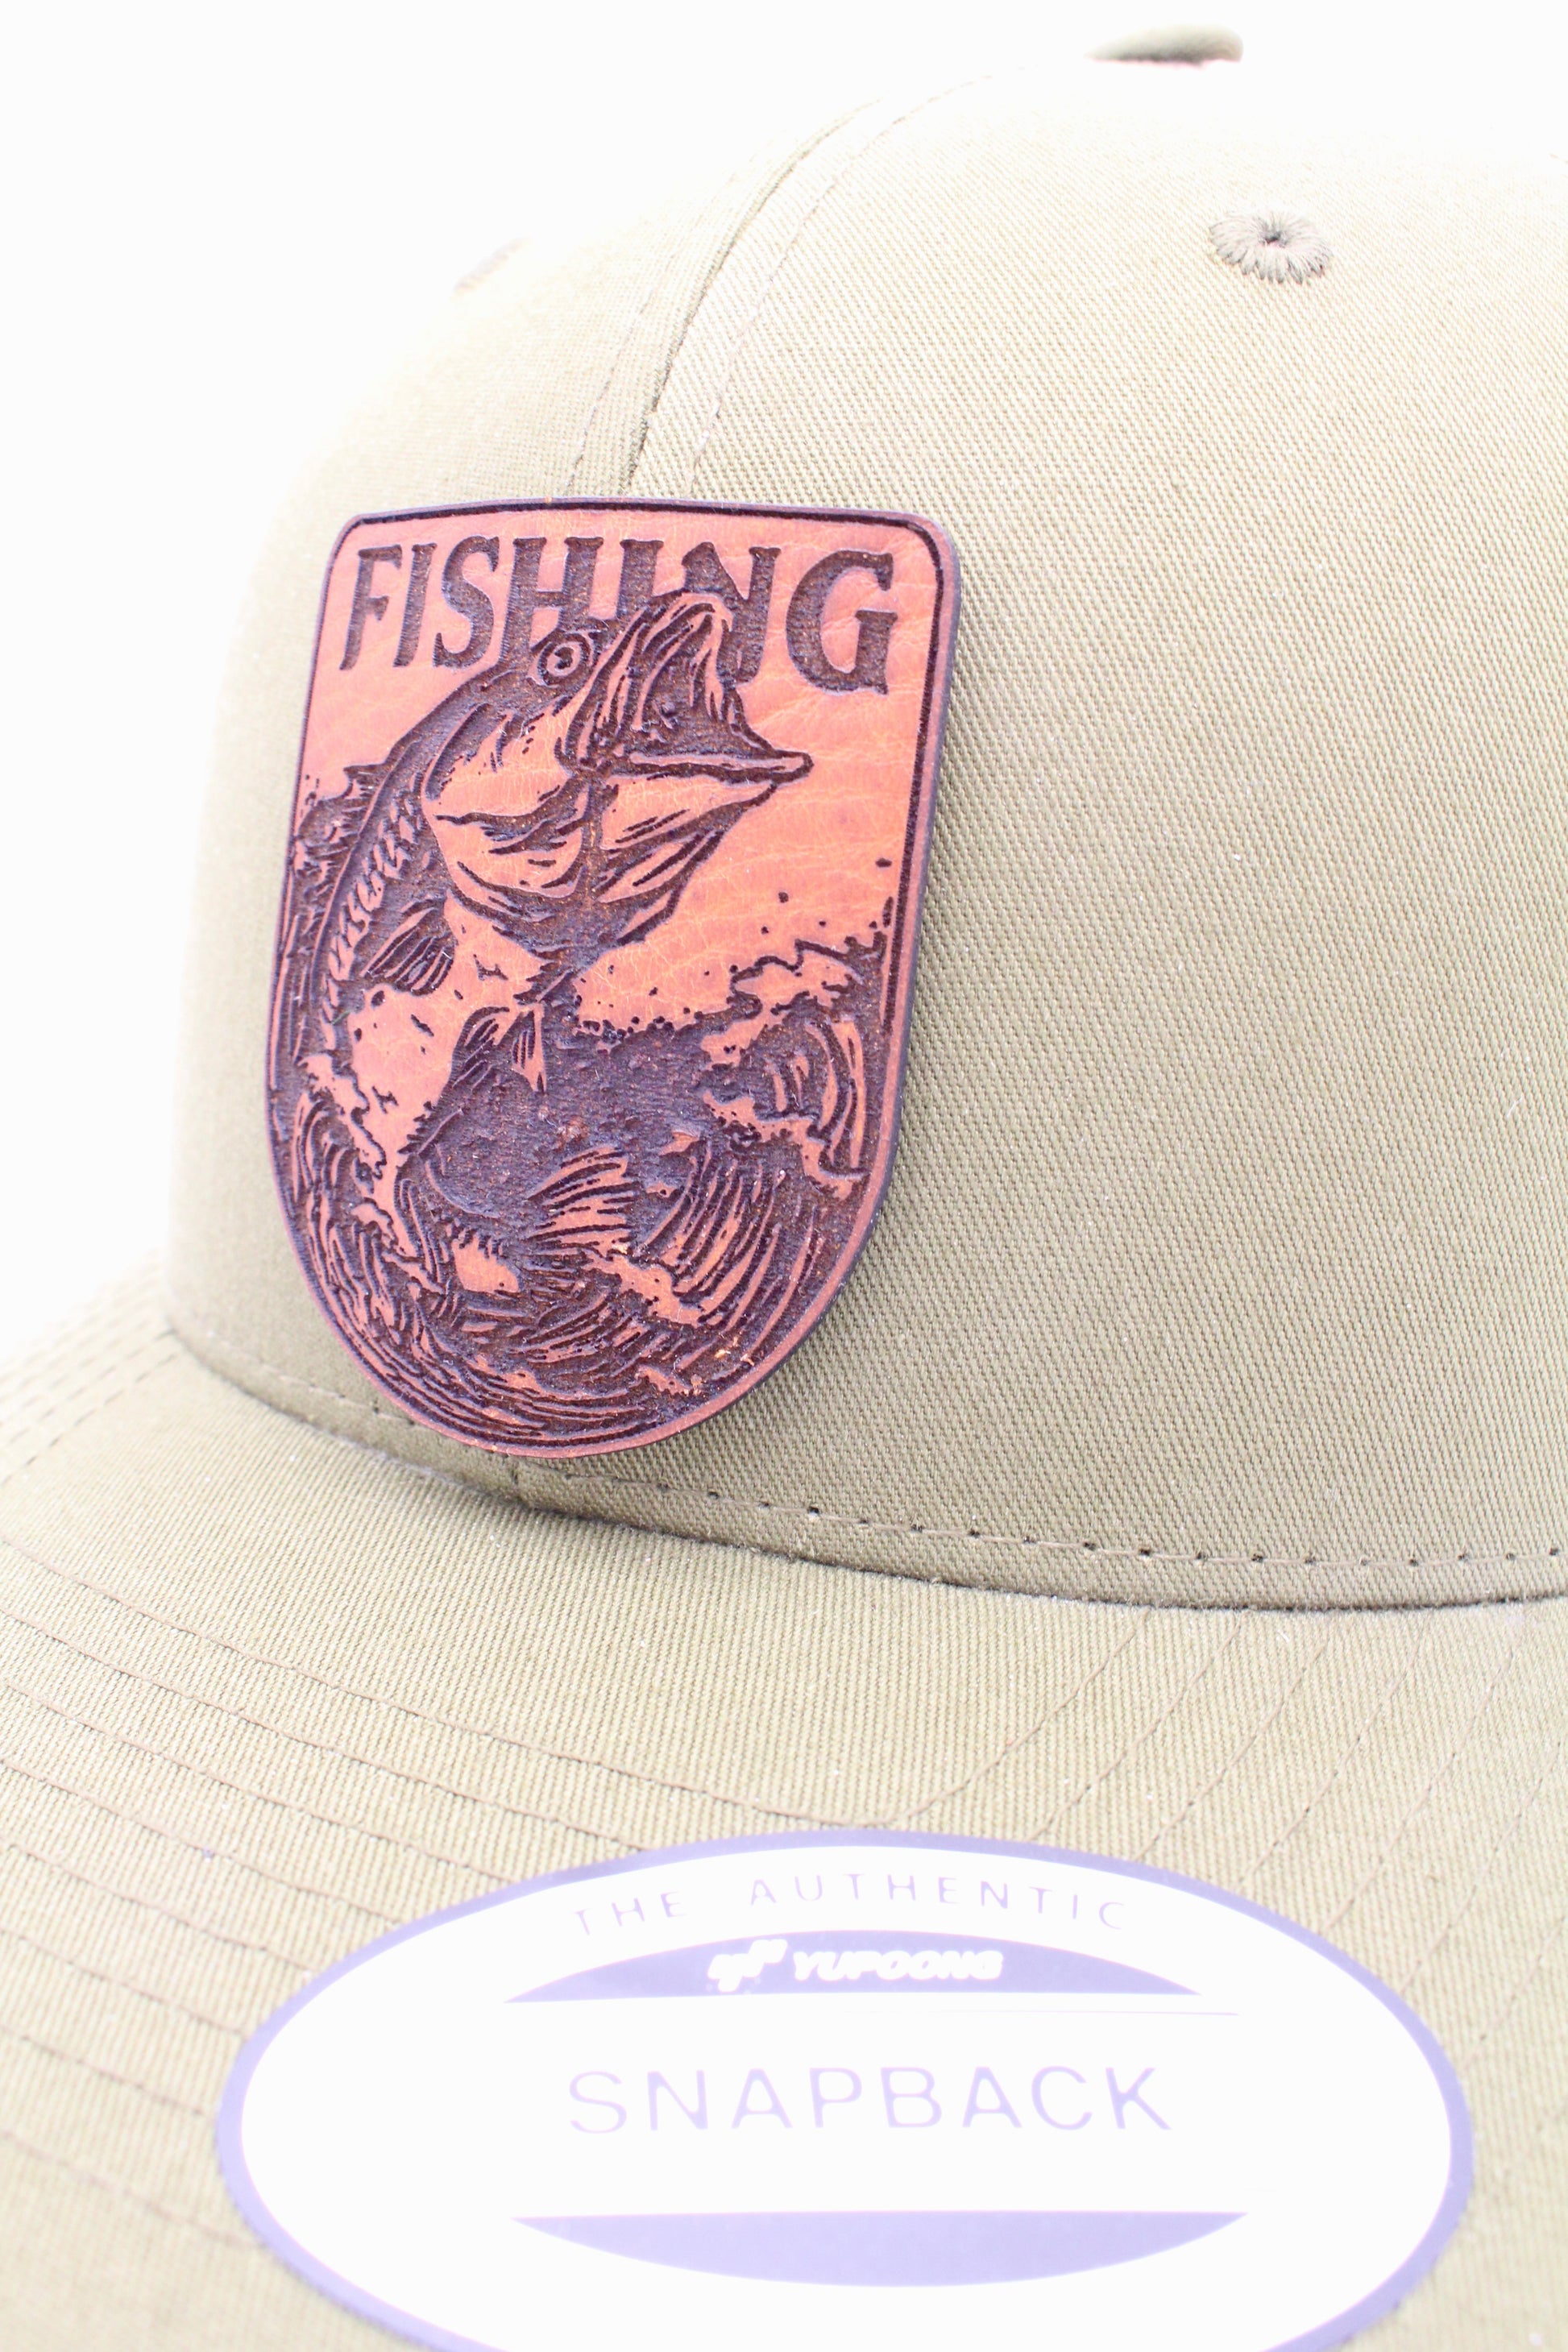 Local Hooker Fishing Fisherman Laser Engraved Faux Leather Patch Hat Cap